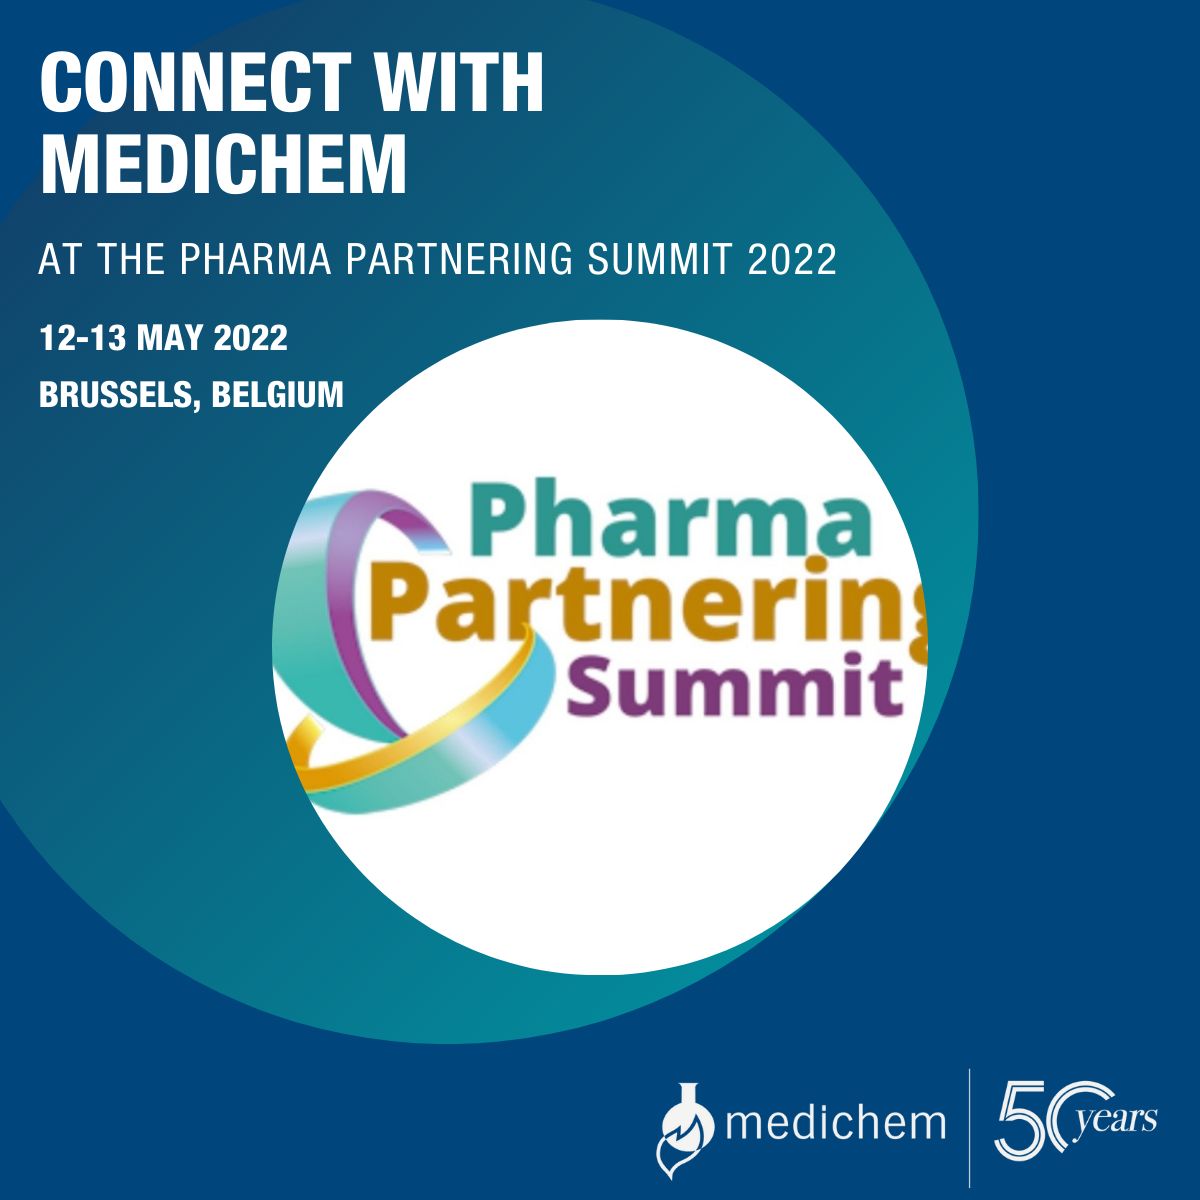 Connect with Medichem at the at the Pharma Partnering Summit 2022